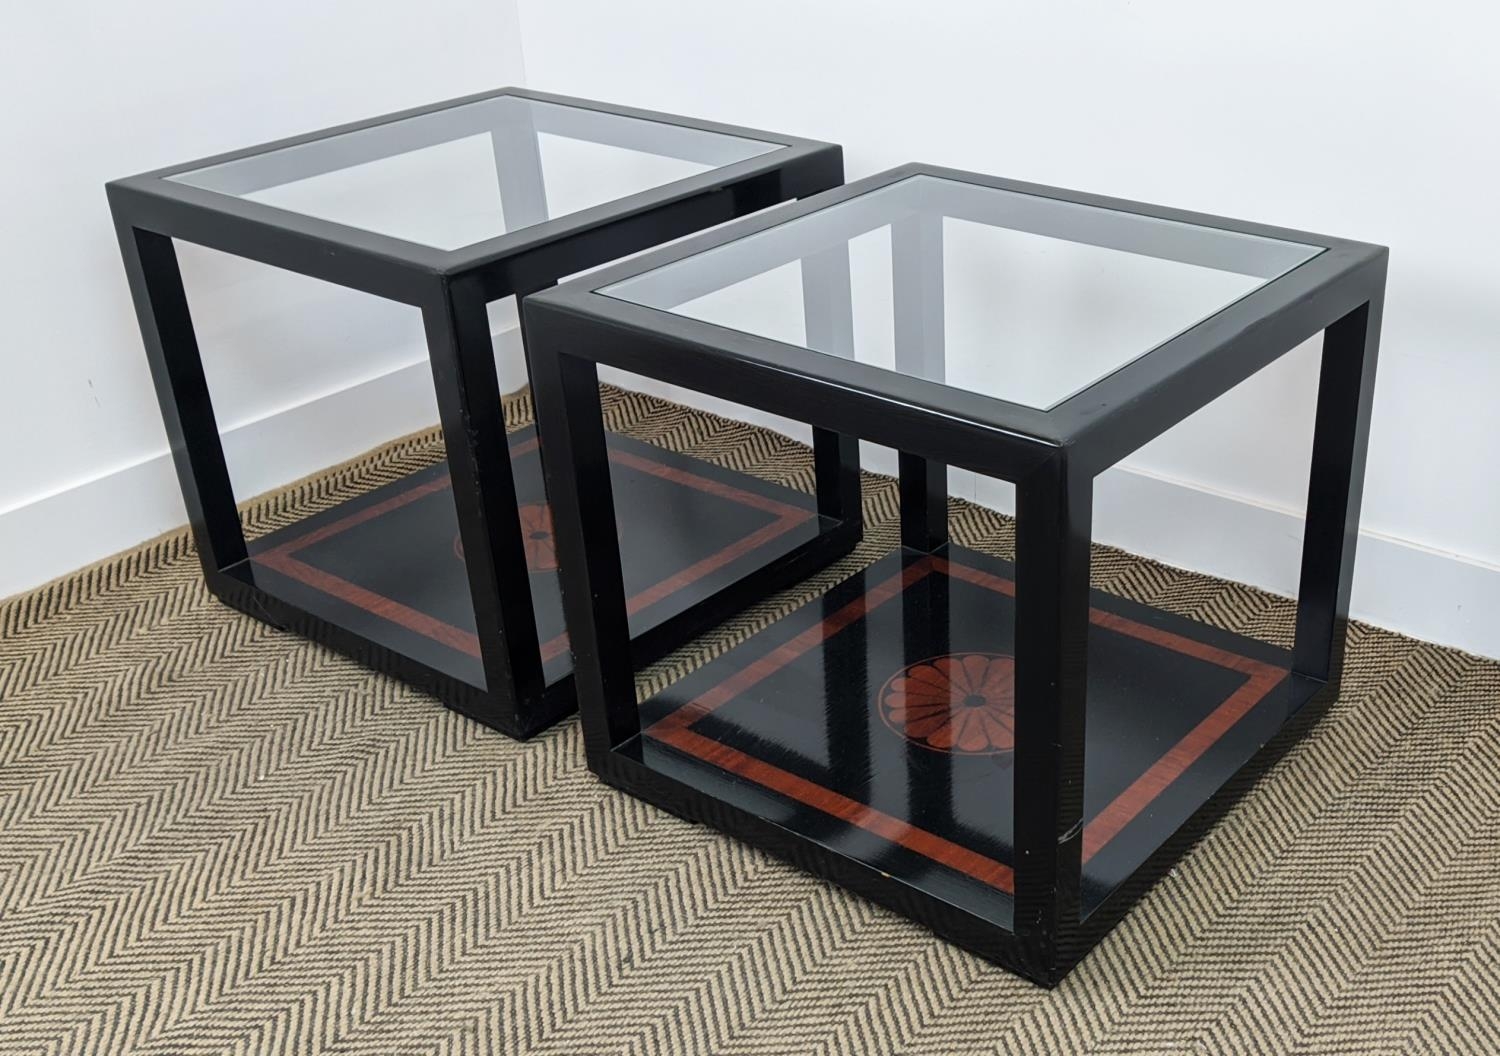 LAMP TABLES, a pair, black lacquer and inlaid with inset square glass tops, 55cm H x 60cm W. - Image 8 of 16